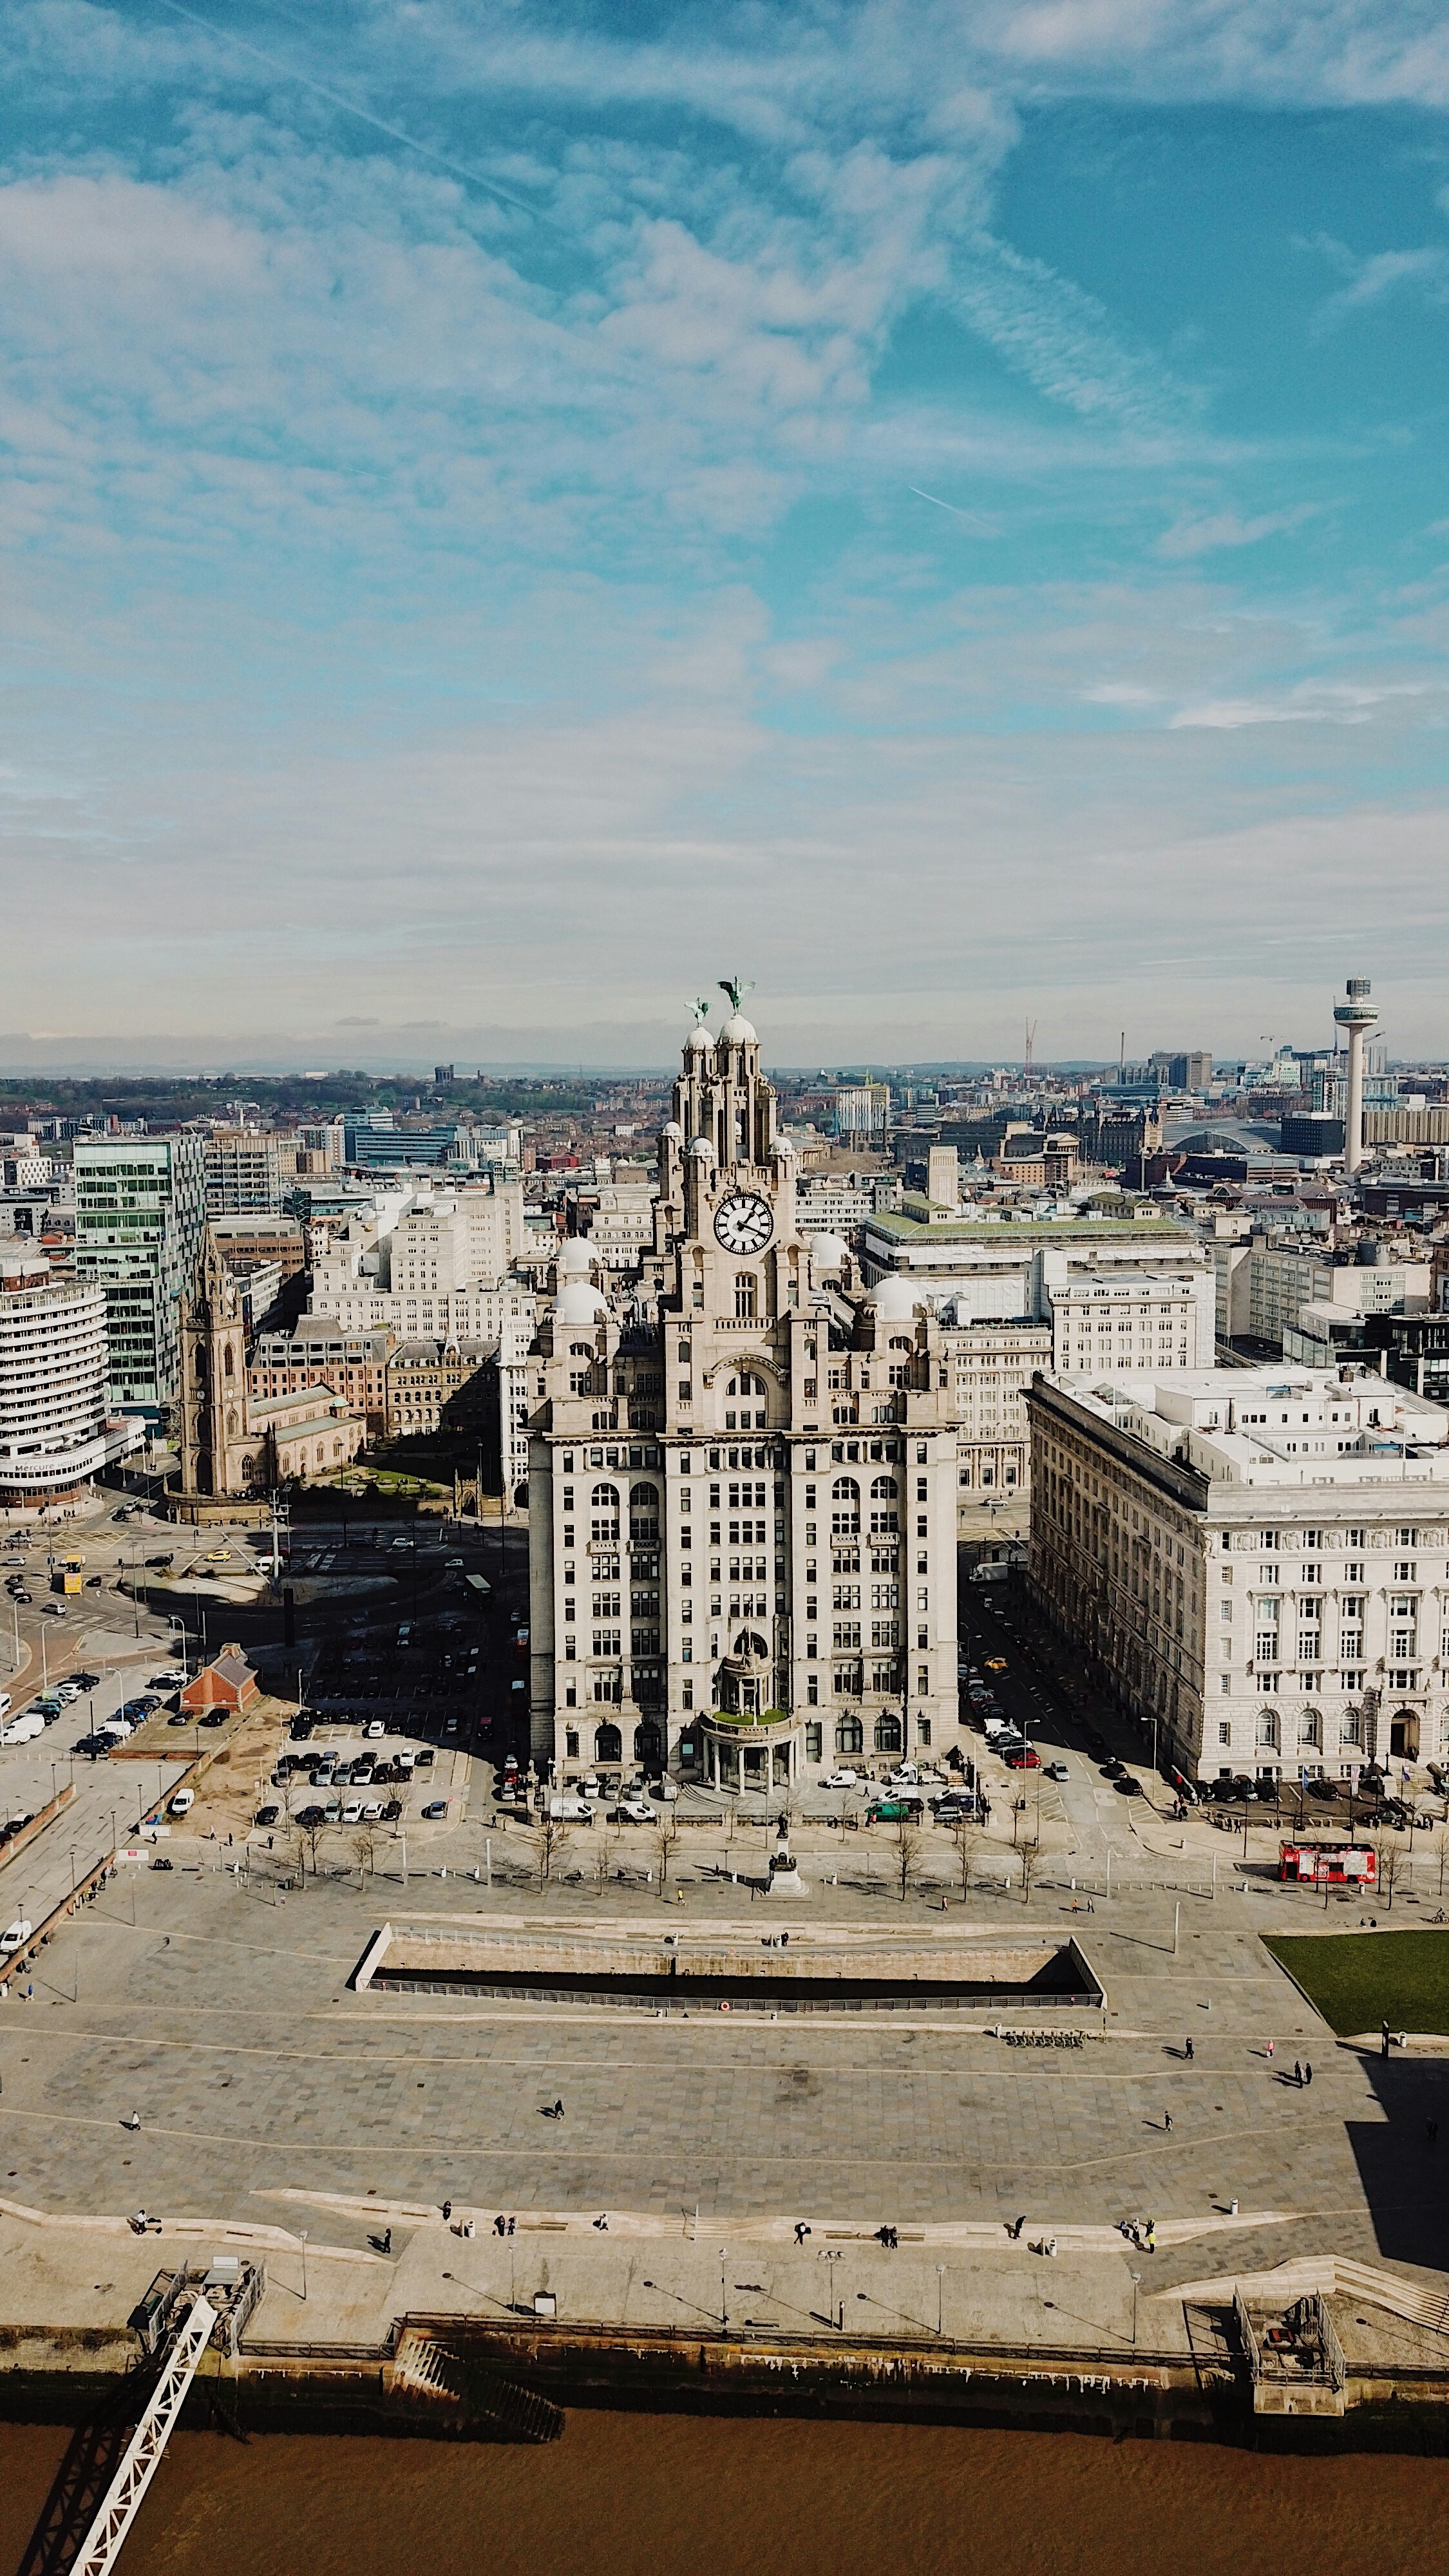 An aerial drone photo of the Royal Liver Building, Pier Head, Liverpool UK. Photo taken with a DJI Mavic Pro drone